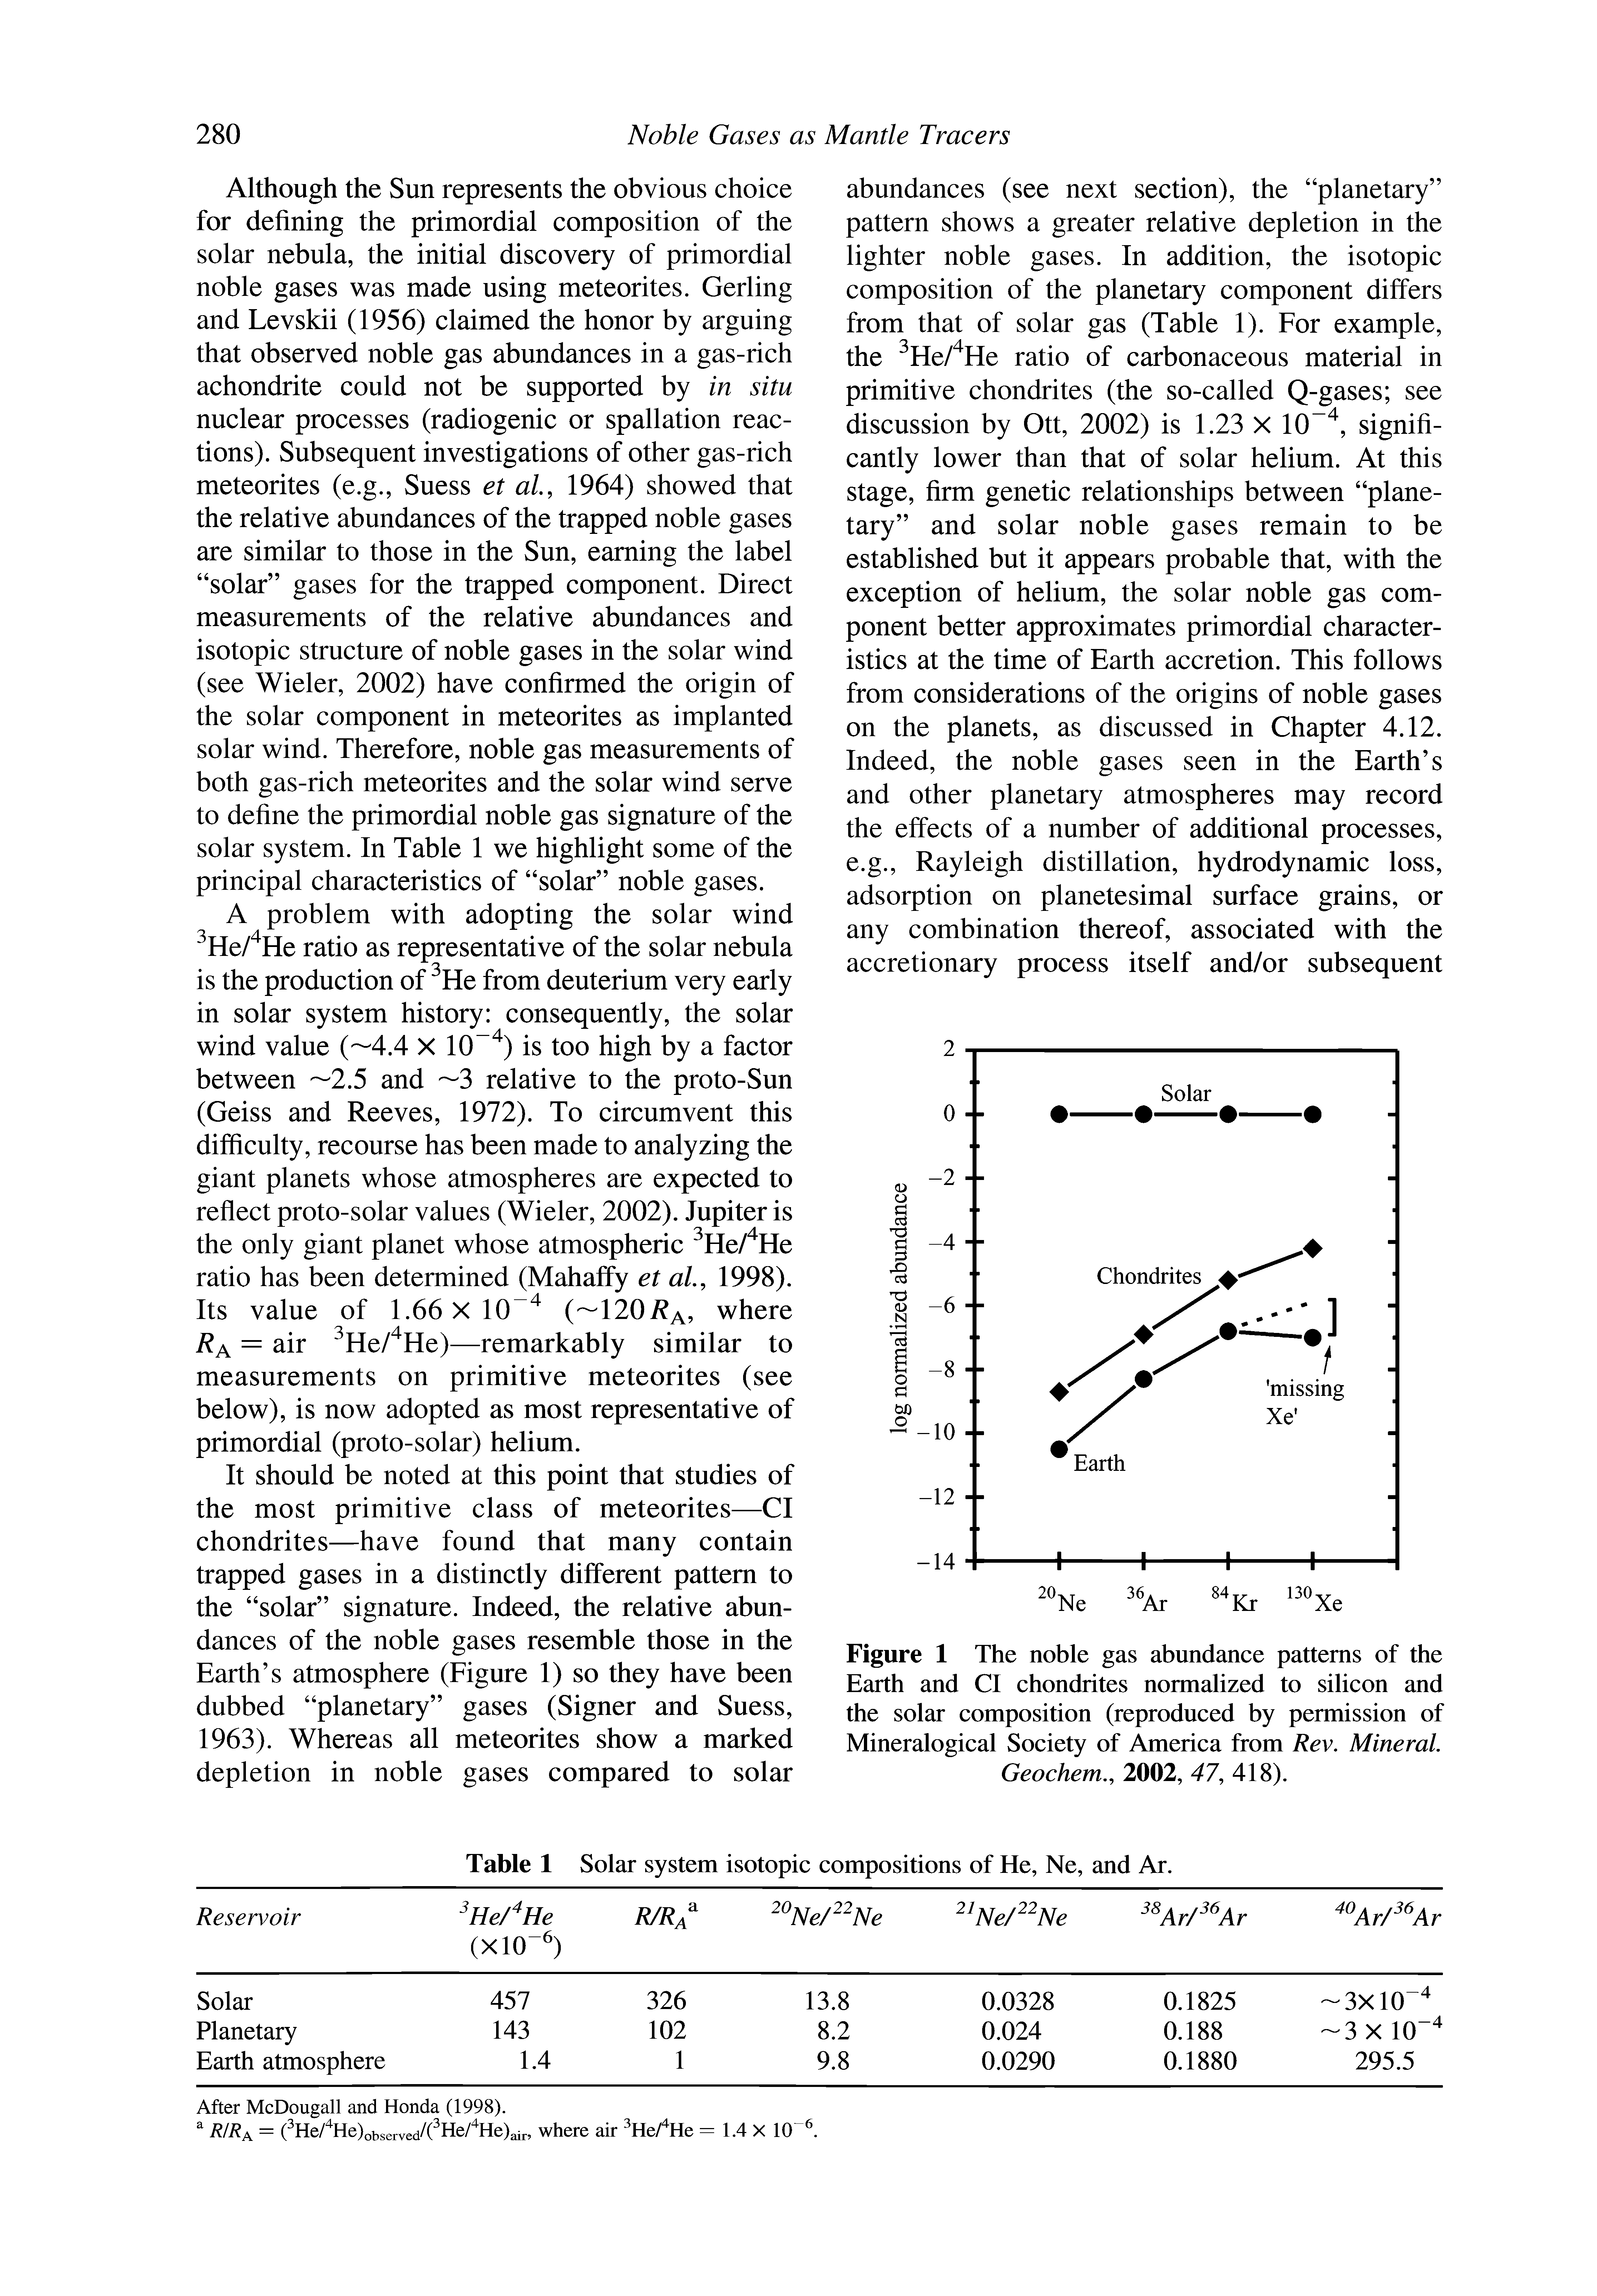 Figure 1 The noble gas abundance patterns of the Earth and Cl chondrites normalized to silicon and the solar composition (reproduced by permission of Mineralogical Society of America from Rev. Mineral. Geochem., 2002, 47, 418).